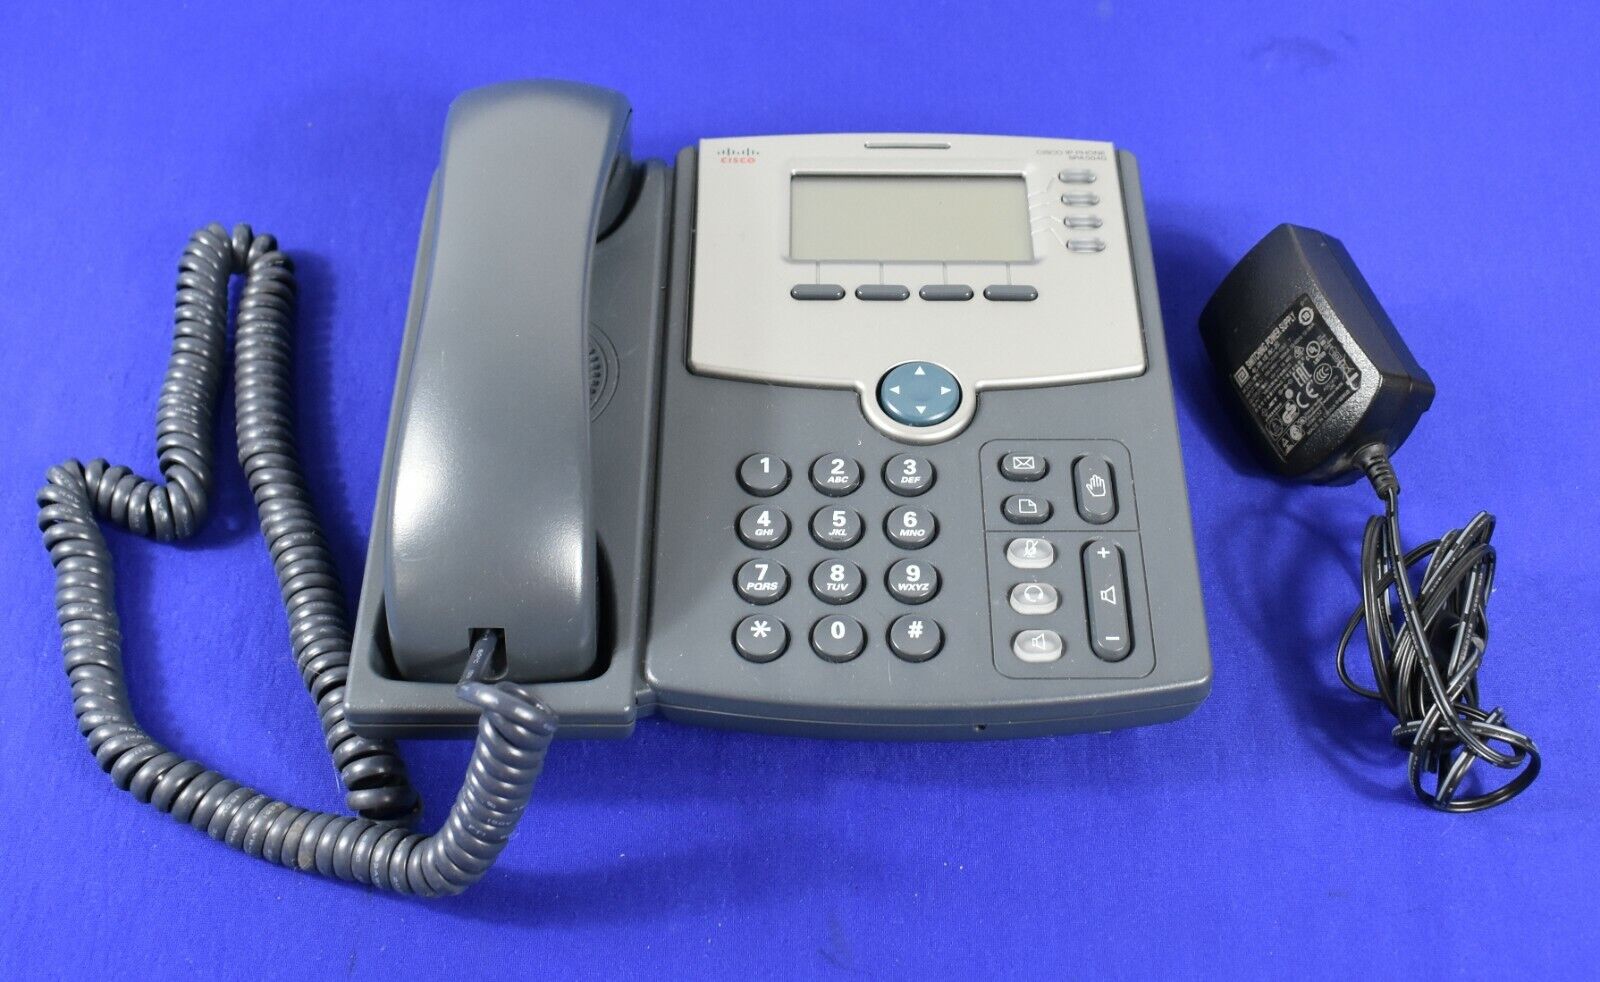 Cisco SPA 504G Small Business IP Phone - SPA504G      #3842